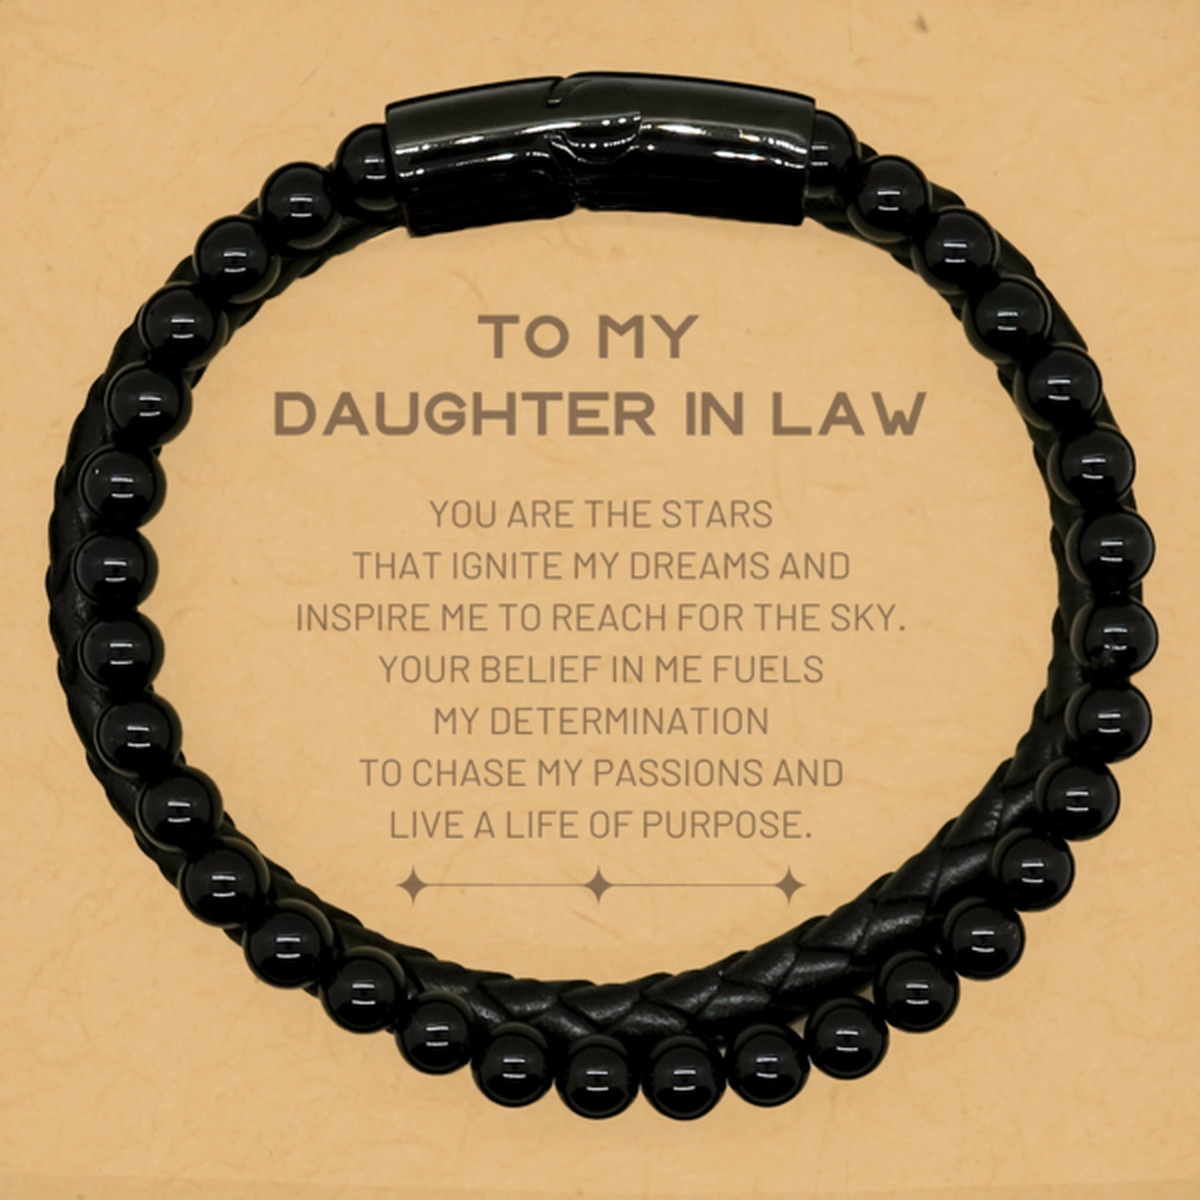 To My Daughter In Law Stone Leather Bracelets, You are the stars that ignite my dreams and inspire me to reach for the sky, Birthday Unique Gifts For Daughter In Law, Thank You Gifts For Daughter In Law